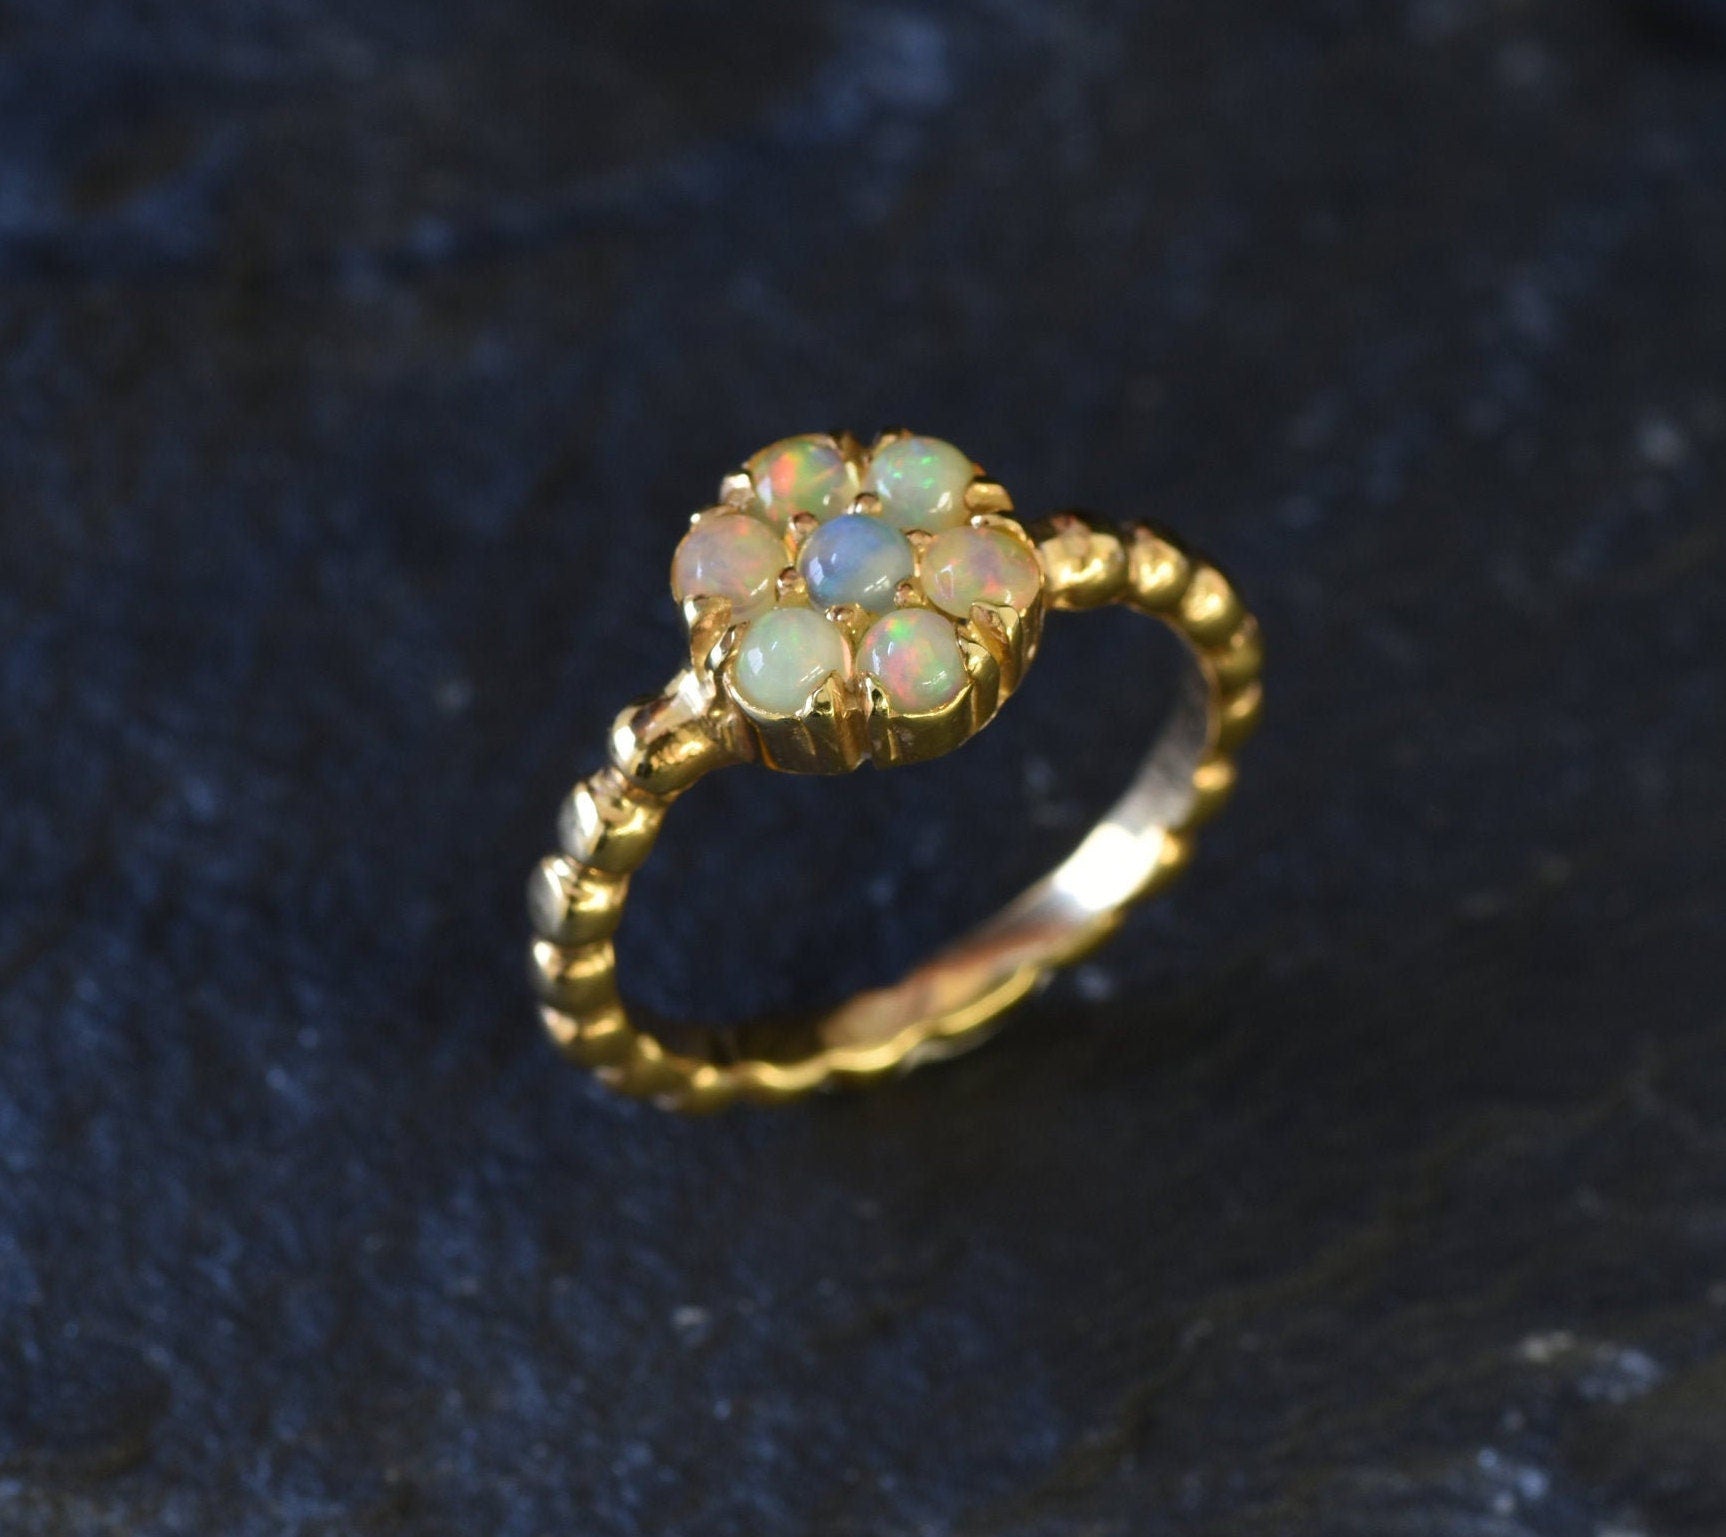 Gold Flower Ring, Fire Opal Ring, Daisy Ring, Natural Opal, October Birthstone, Gold Plated Ring, Dainty Flower Ring, Vintage Ring, Vermeil